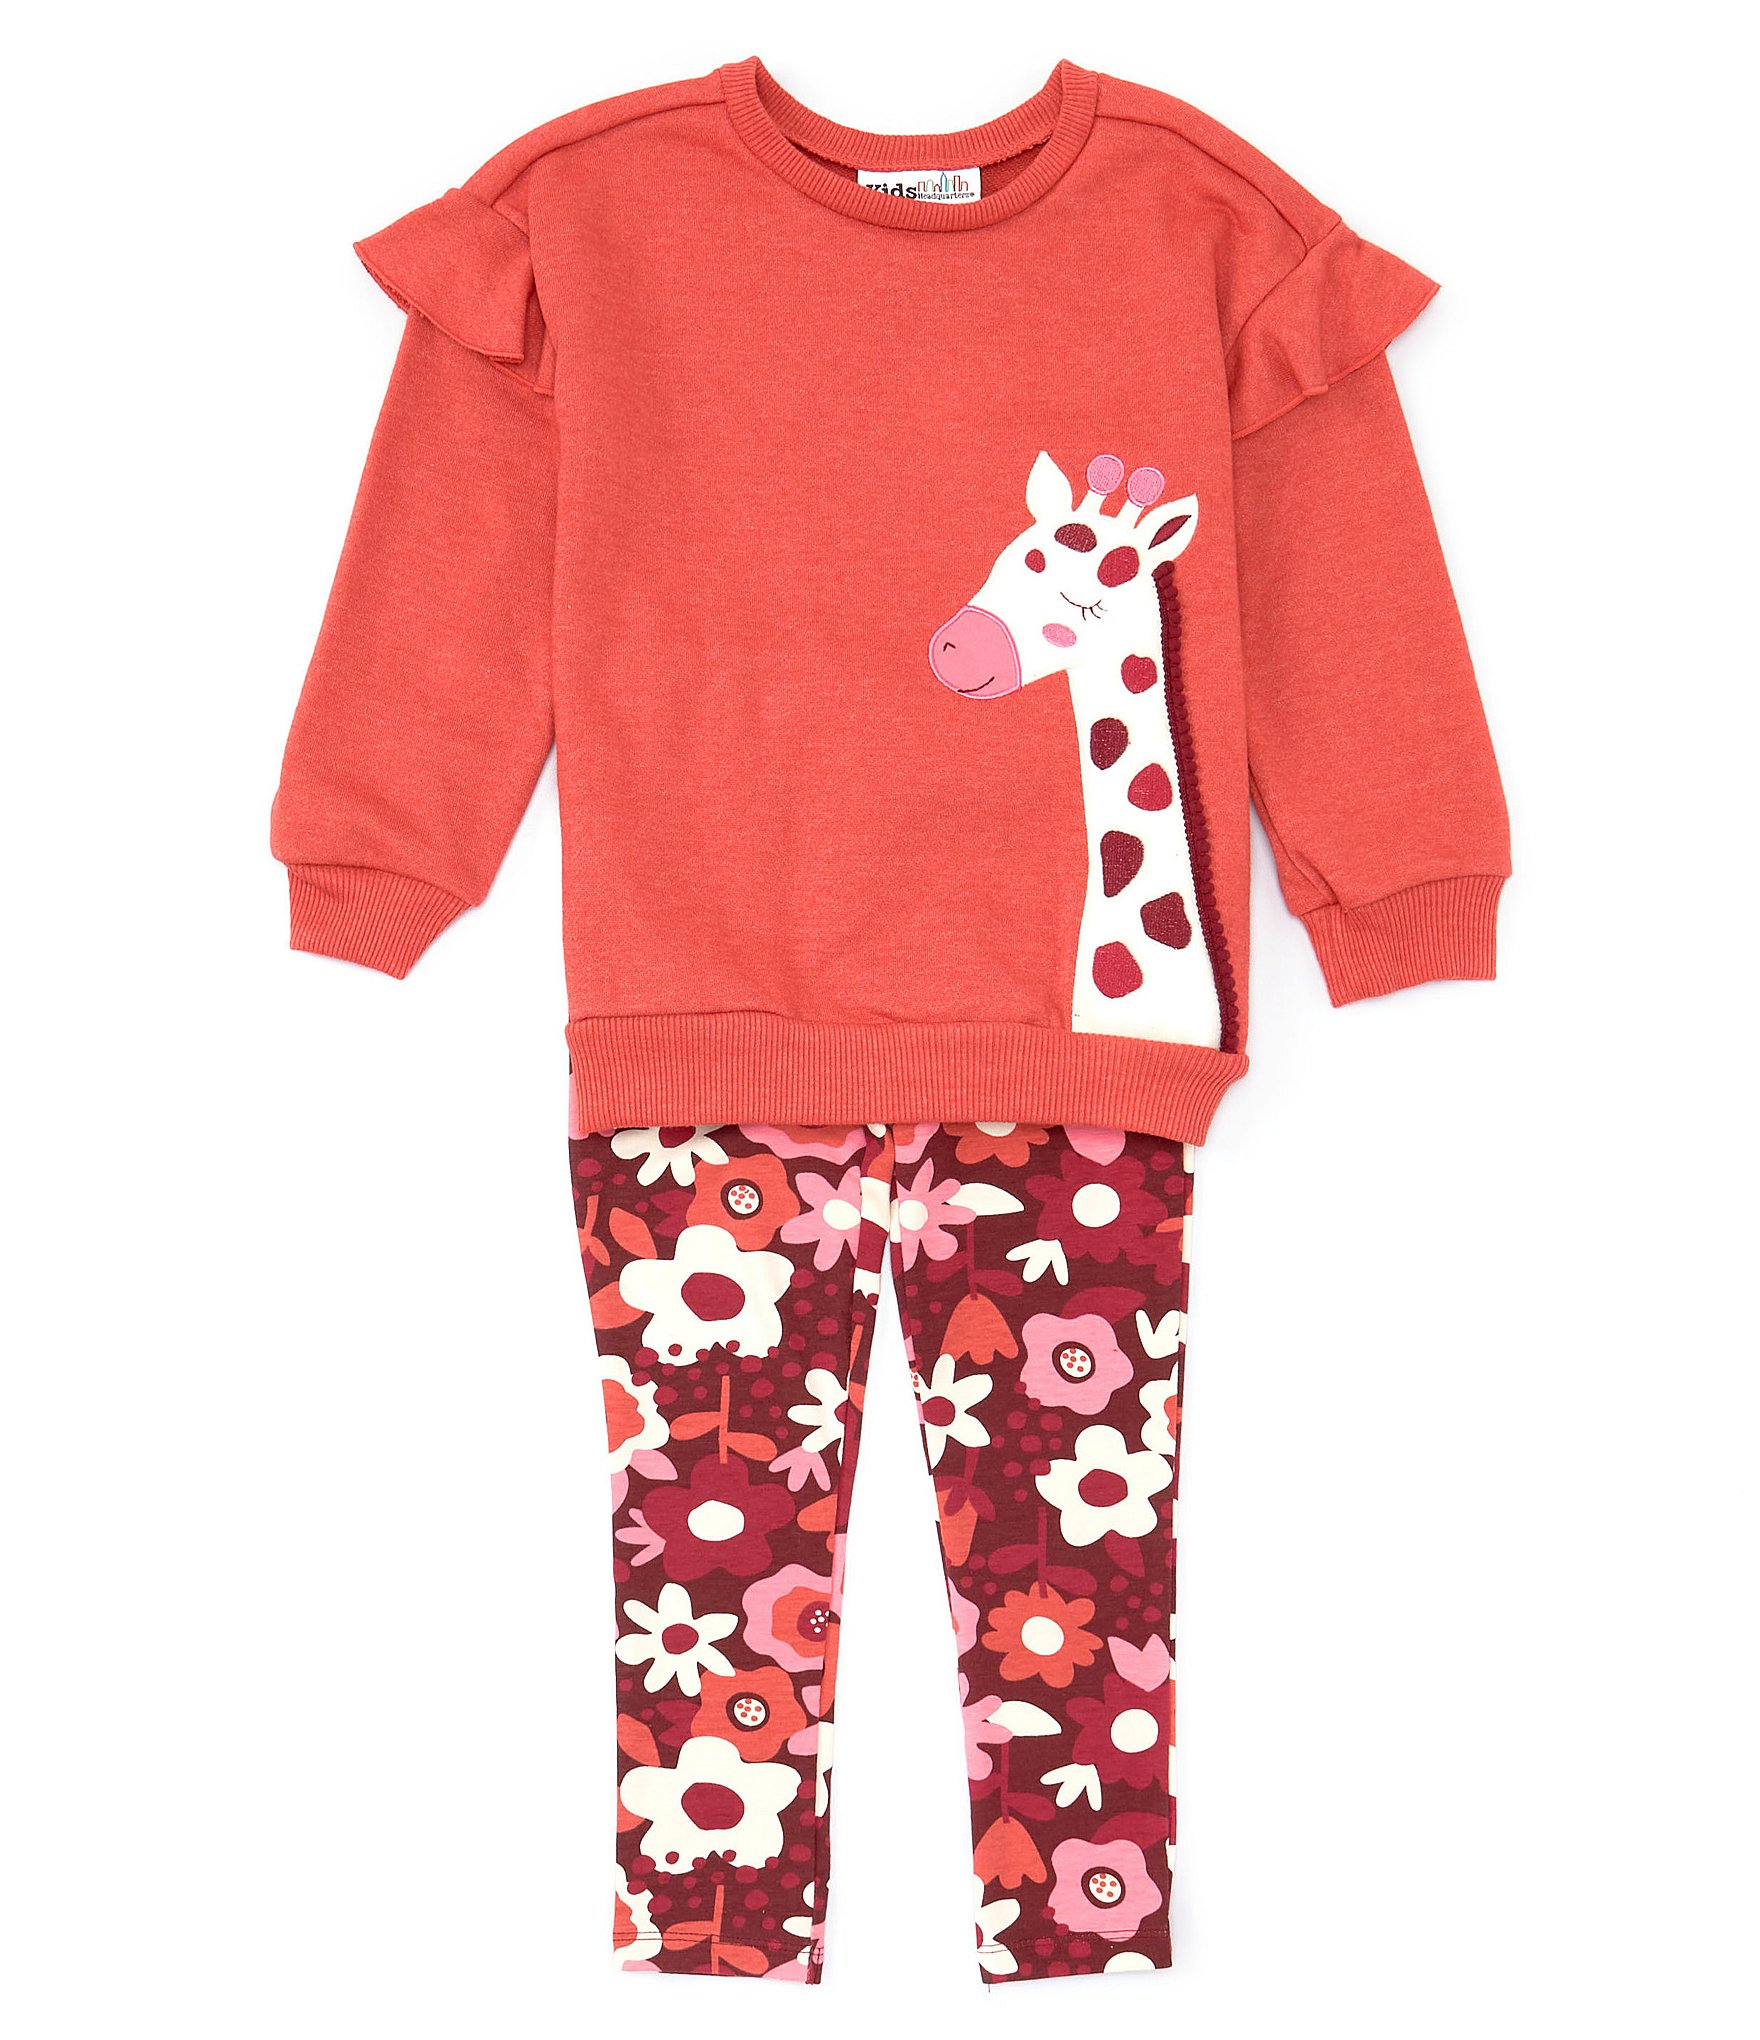 Printed French Terry Pajama Set for Girls